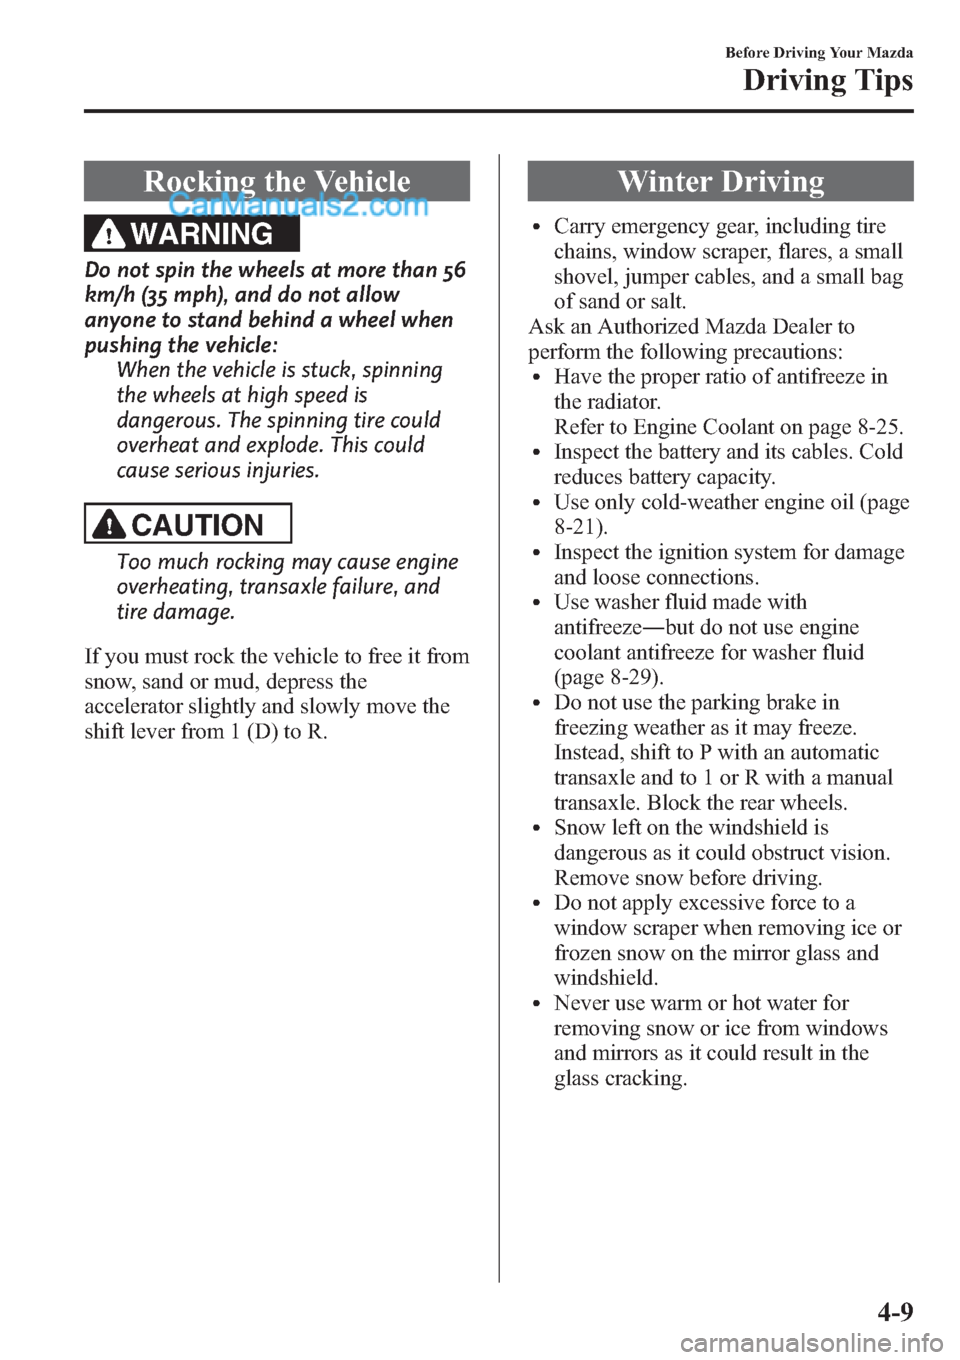 MAZDA MODEL MAZDASPEED 3 2013  Owners Manual (in English) Rocking the Vehicle
WARNING
Do not spin the wheels at more than 56
km/h (35 mph), and do not allow
anyone to stand behind a wheel when
pushing the vehicle:
When the vehicle is stuck, spinning
the whee